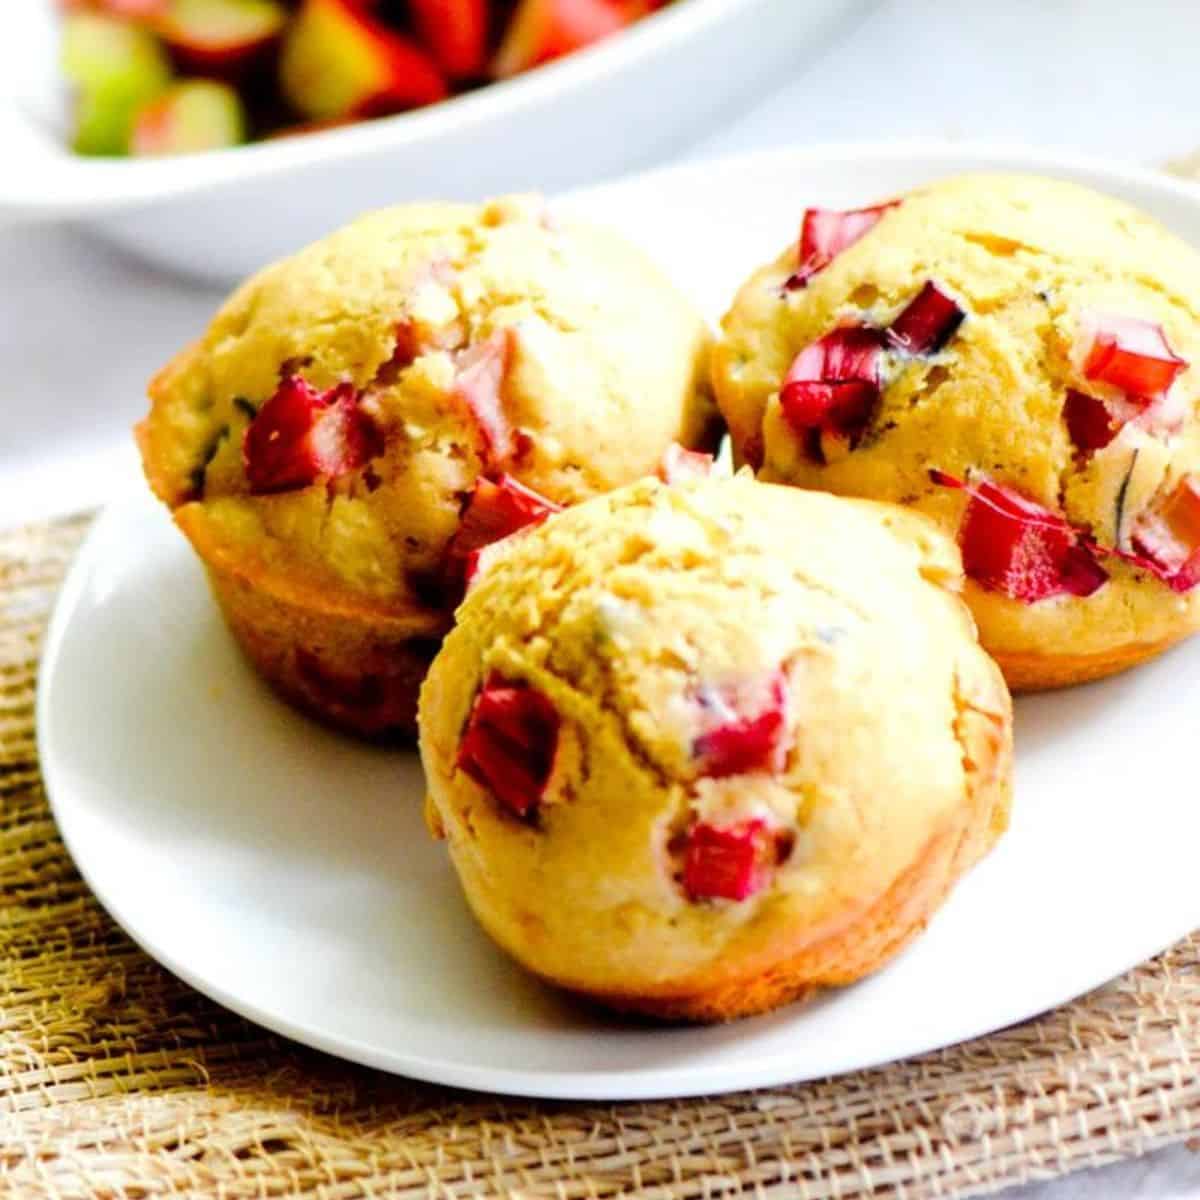 Springtime is the best season because Rhubarb is fresh and in season. Rhubarb muffins are a great way to use up some extra rhubarb that you have lying around in your garden this time of year